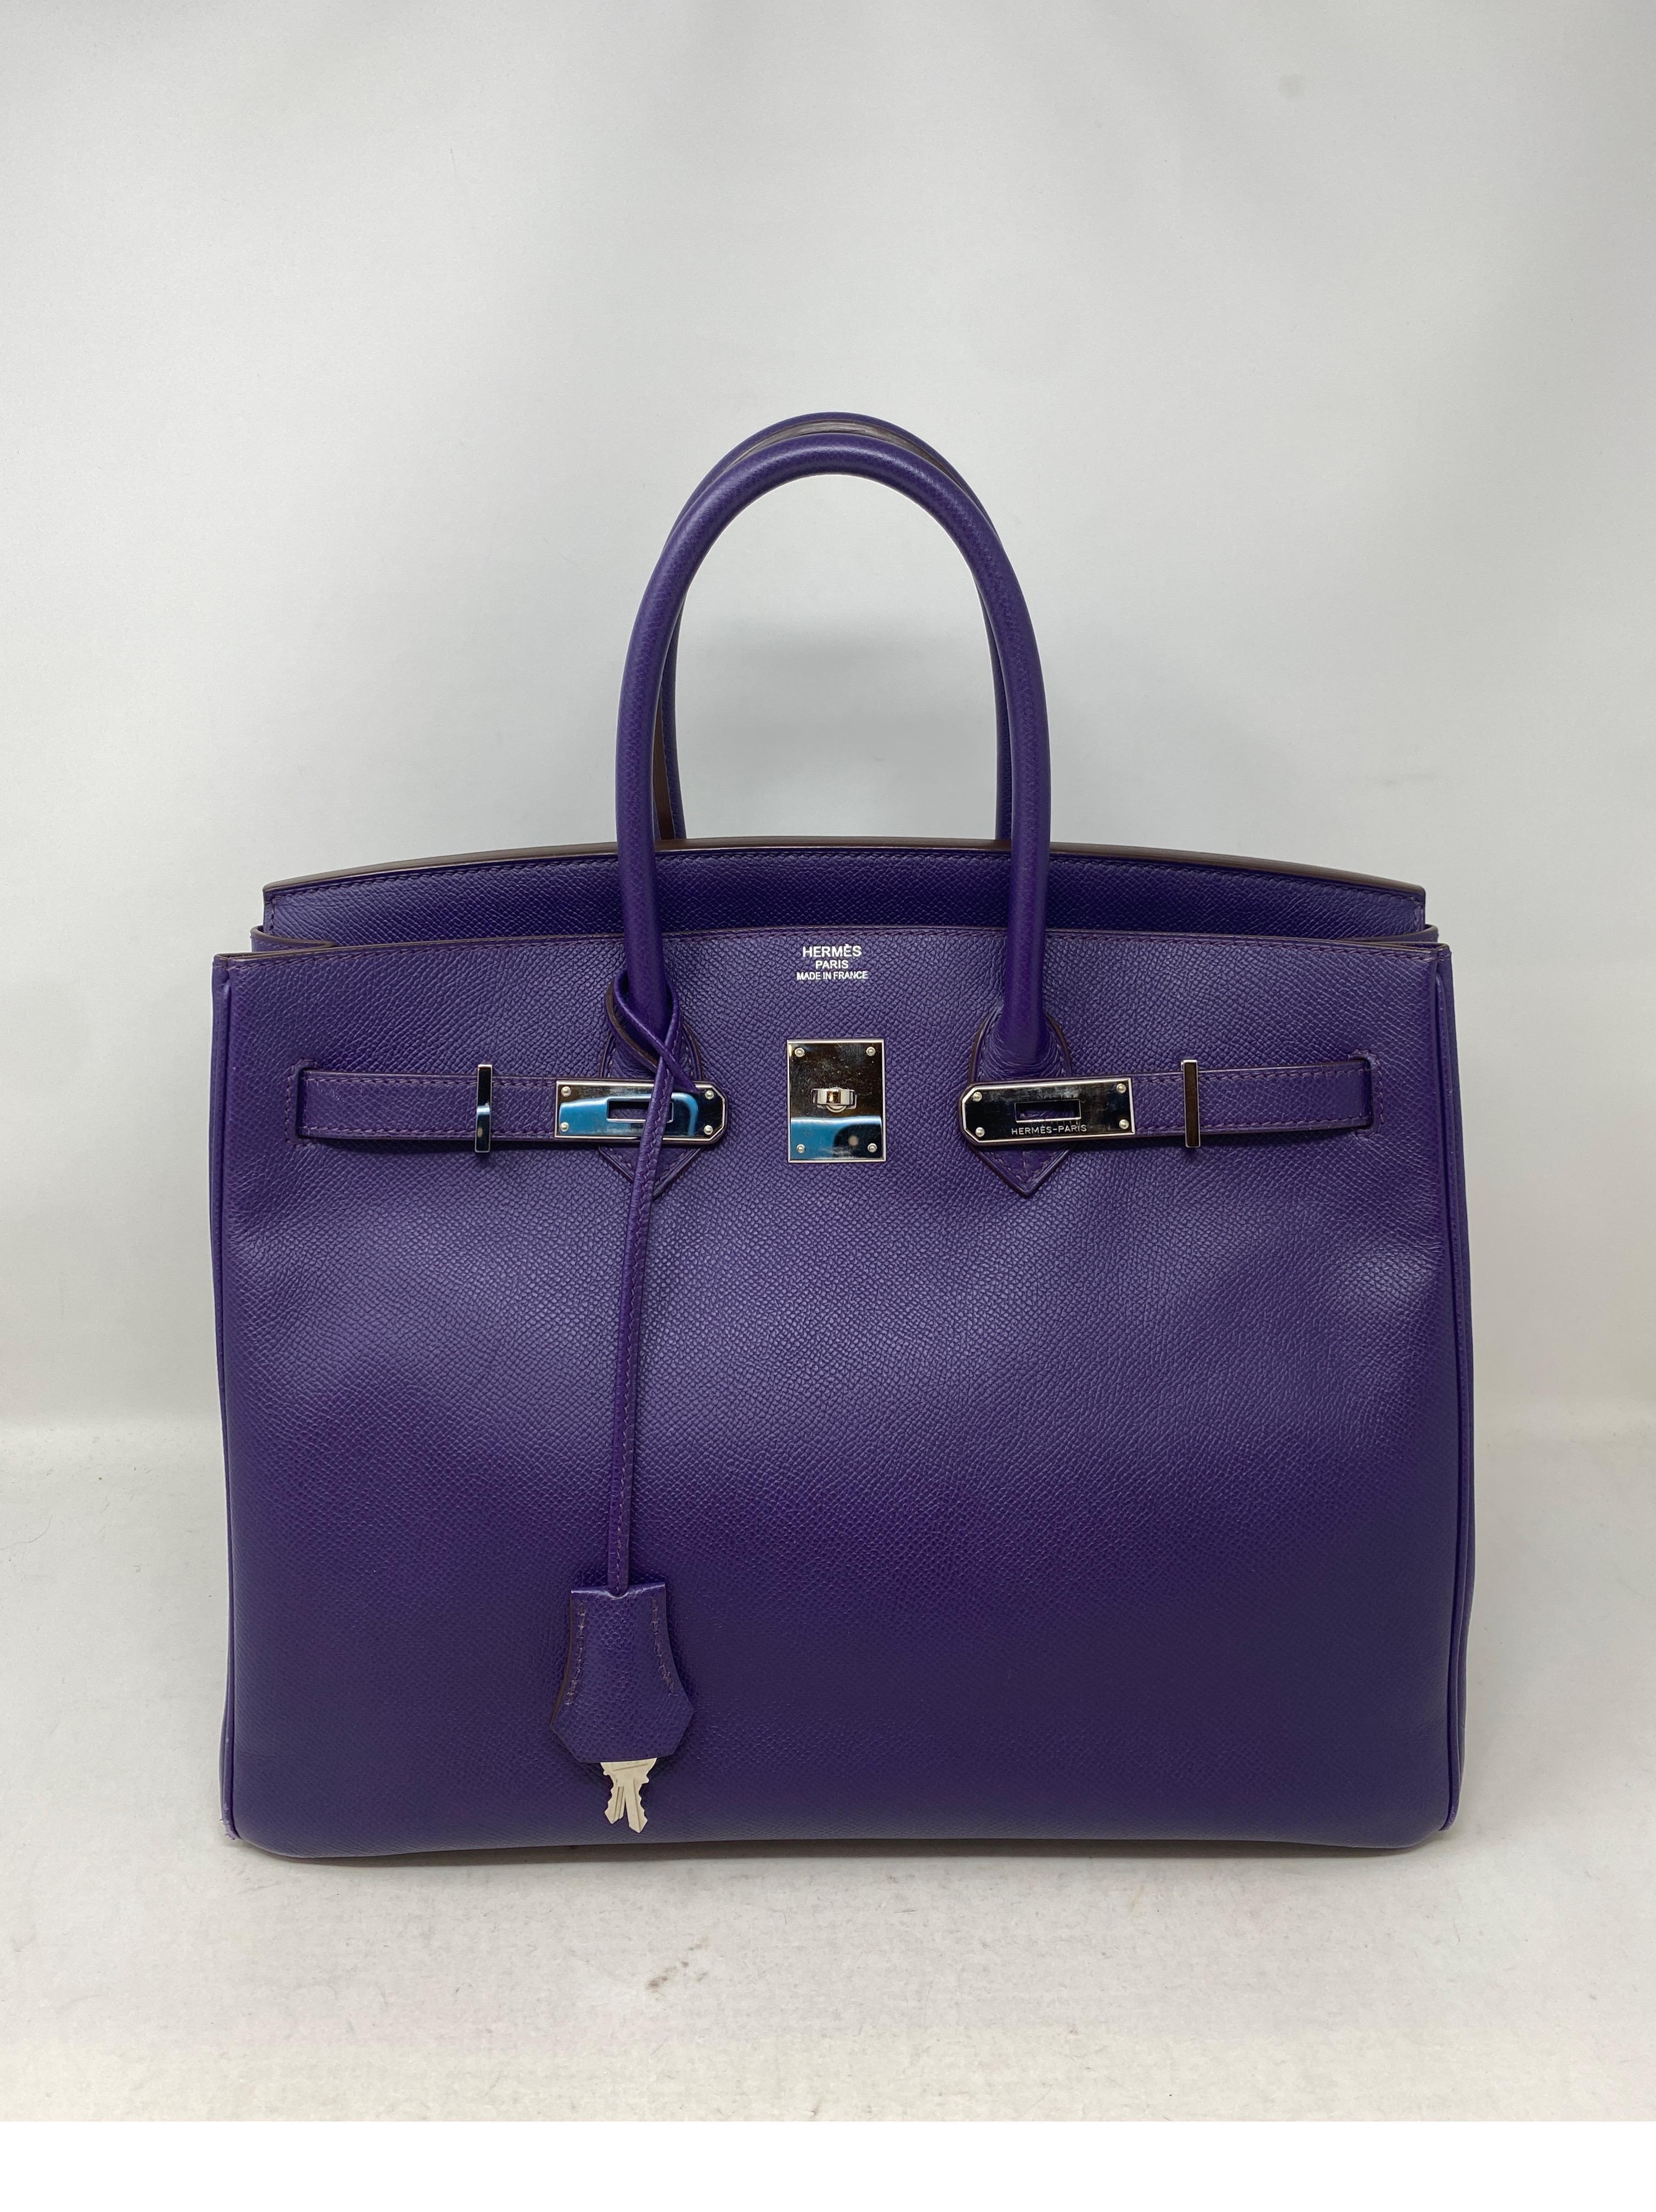 Hermes Purple Birkin 35 Bag. Darker blue-purple color with palladium hardware. Good condition. Epsom leather. Light wear on corners. Please see pictures. Interior clean. Includes clochette, lock, keys, and dust cover. Guaranteed authentic. 